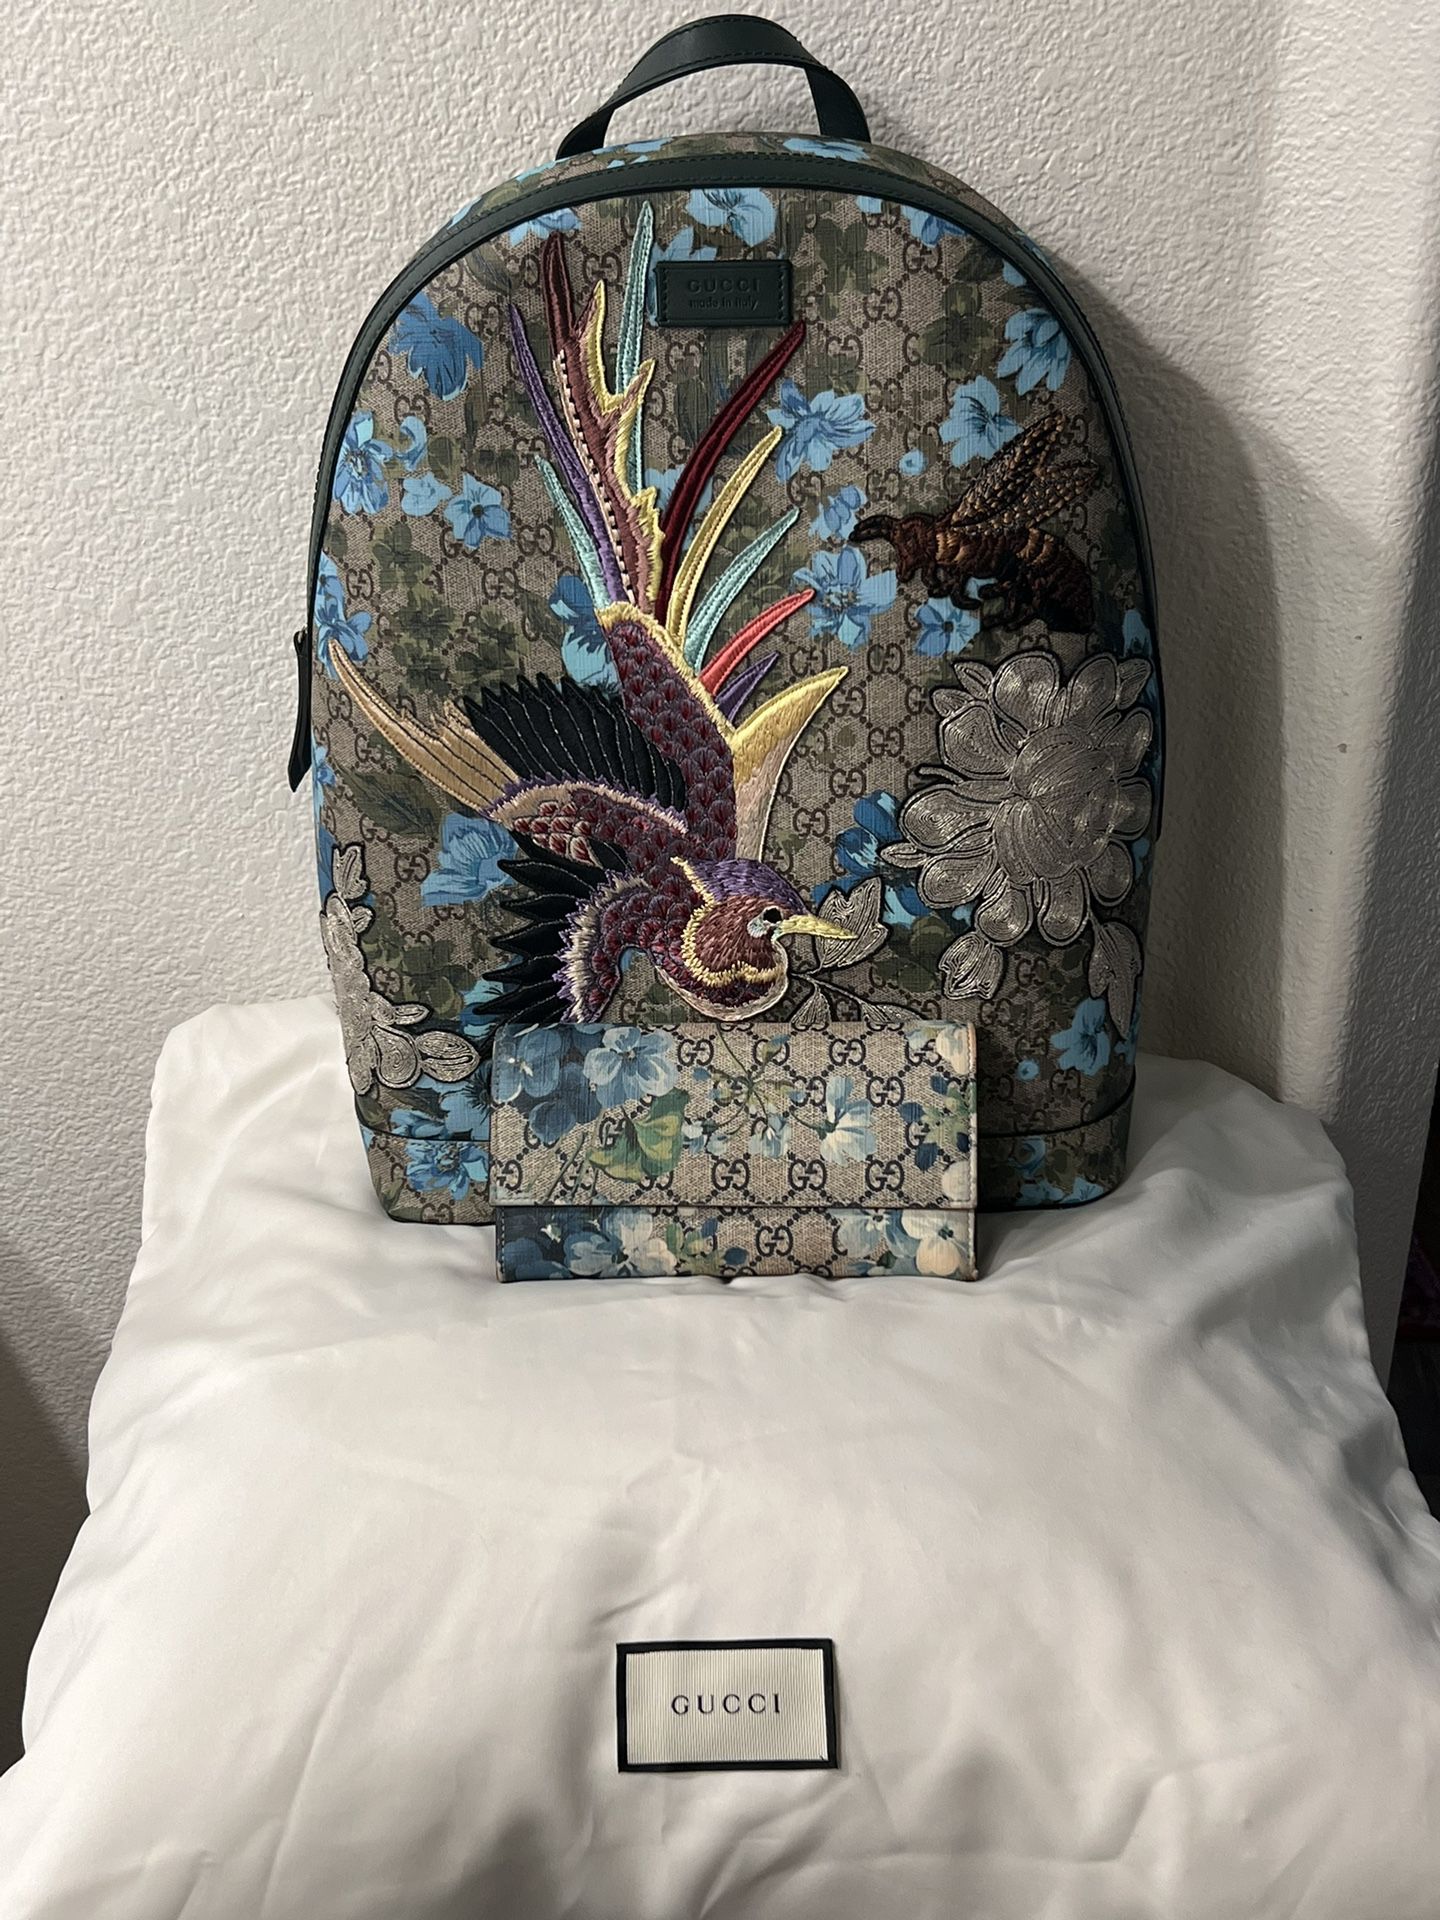 Hindre Hav skuffe *BUNDLE* Authentic Gucci GG Supreme Backpack Blooms Embroidery Bird Bee  Green & Wallet for Sale in Las Vegas, NV - OfferUp